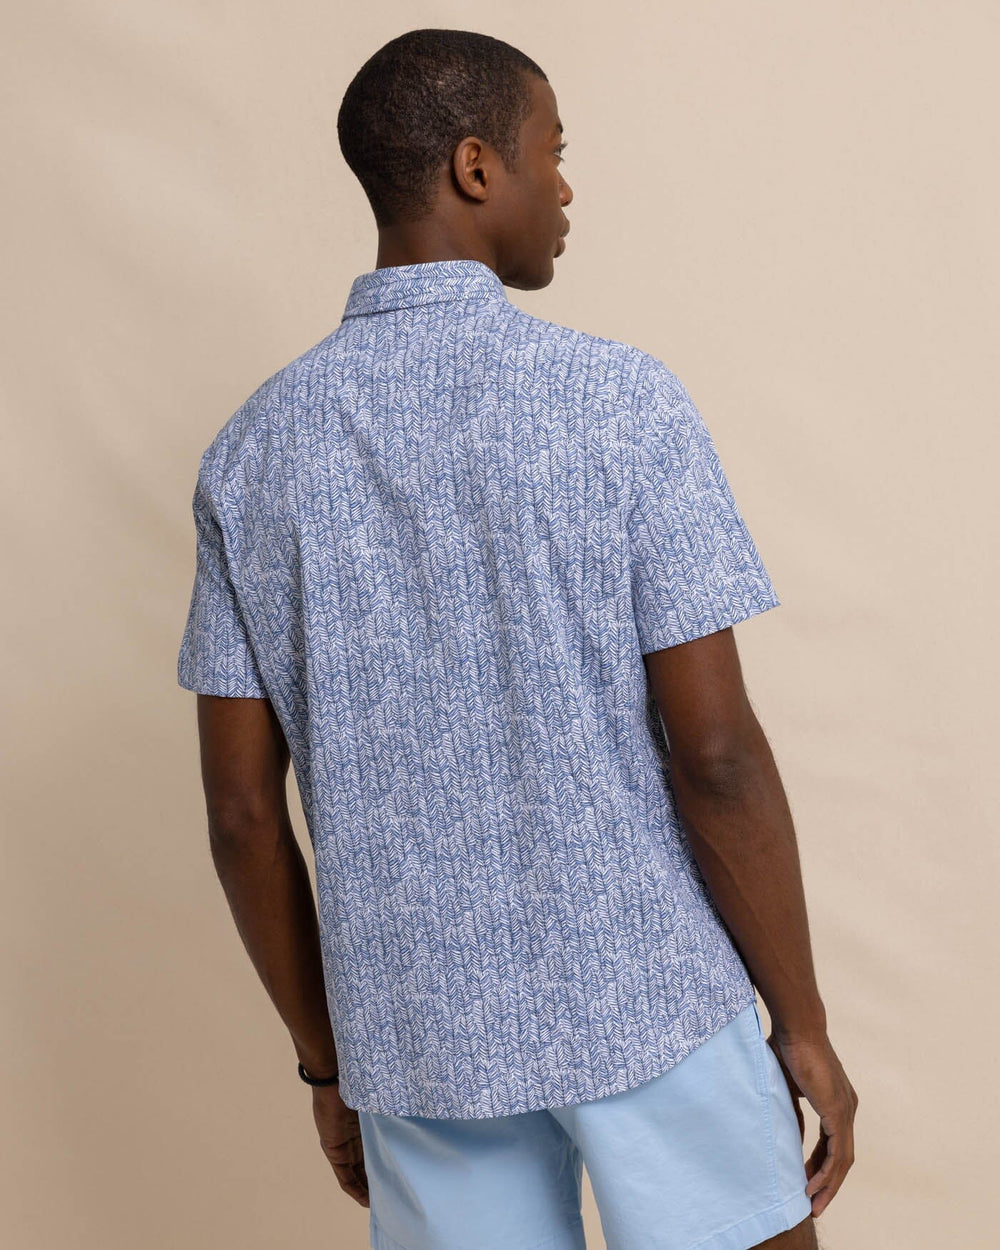 The back view of the Southern Tide Leagally Frond Intercoastal Short Sleeve Sport Shirt by Southern Tide - Eternal Blue